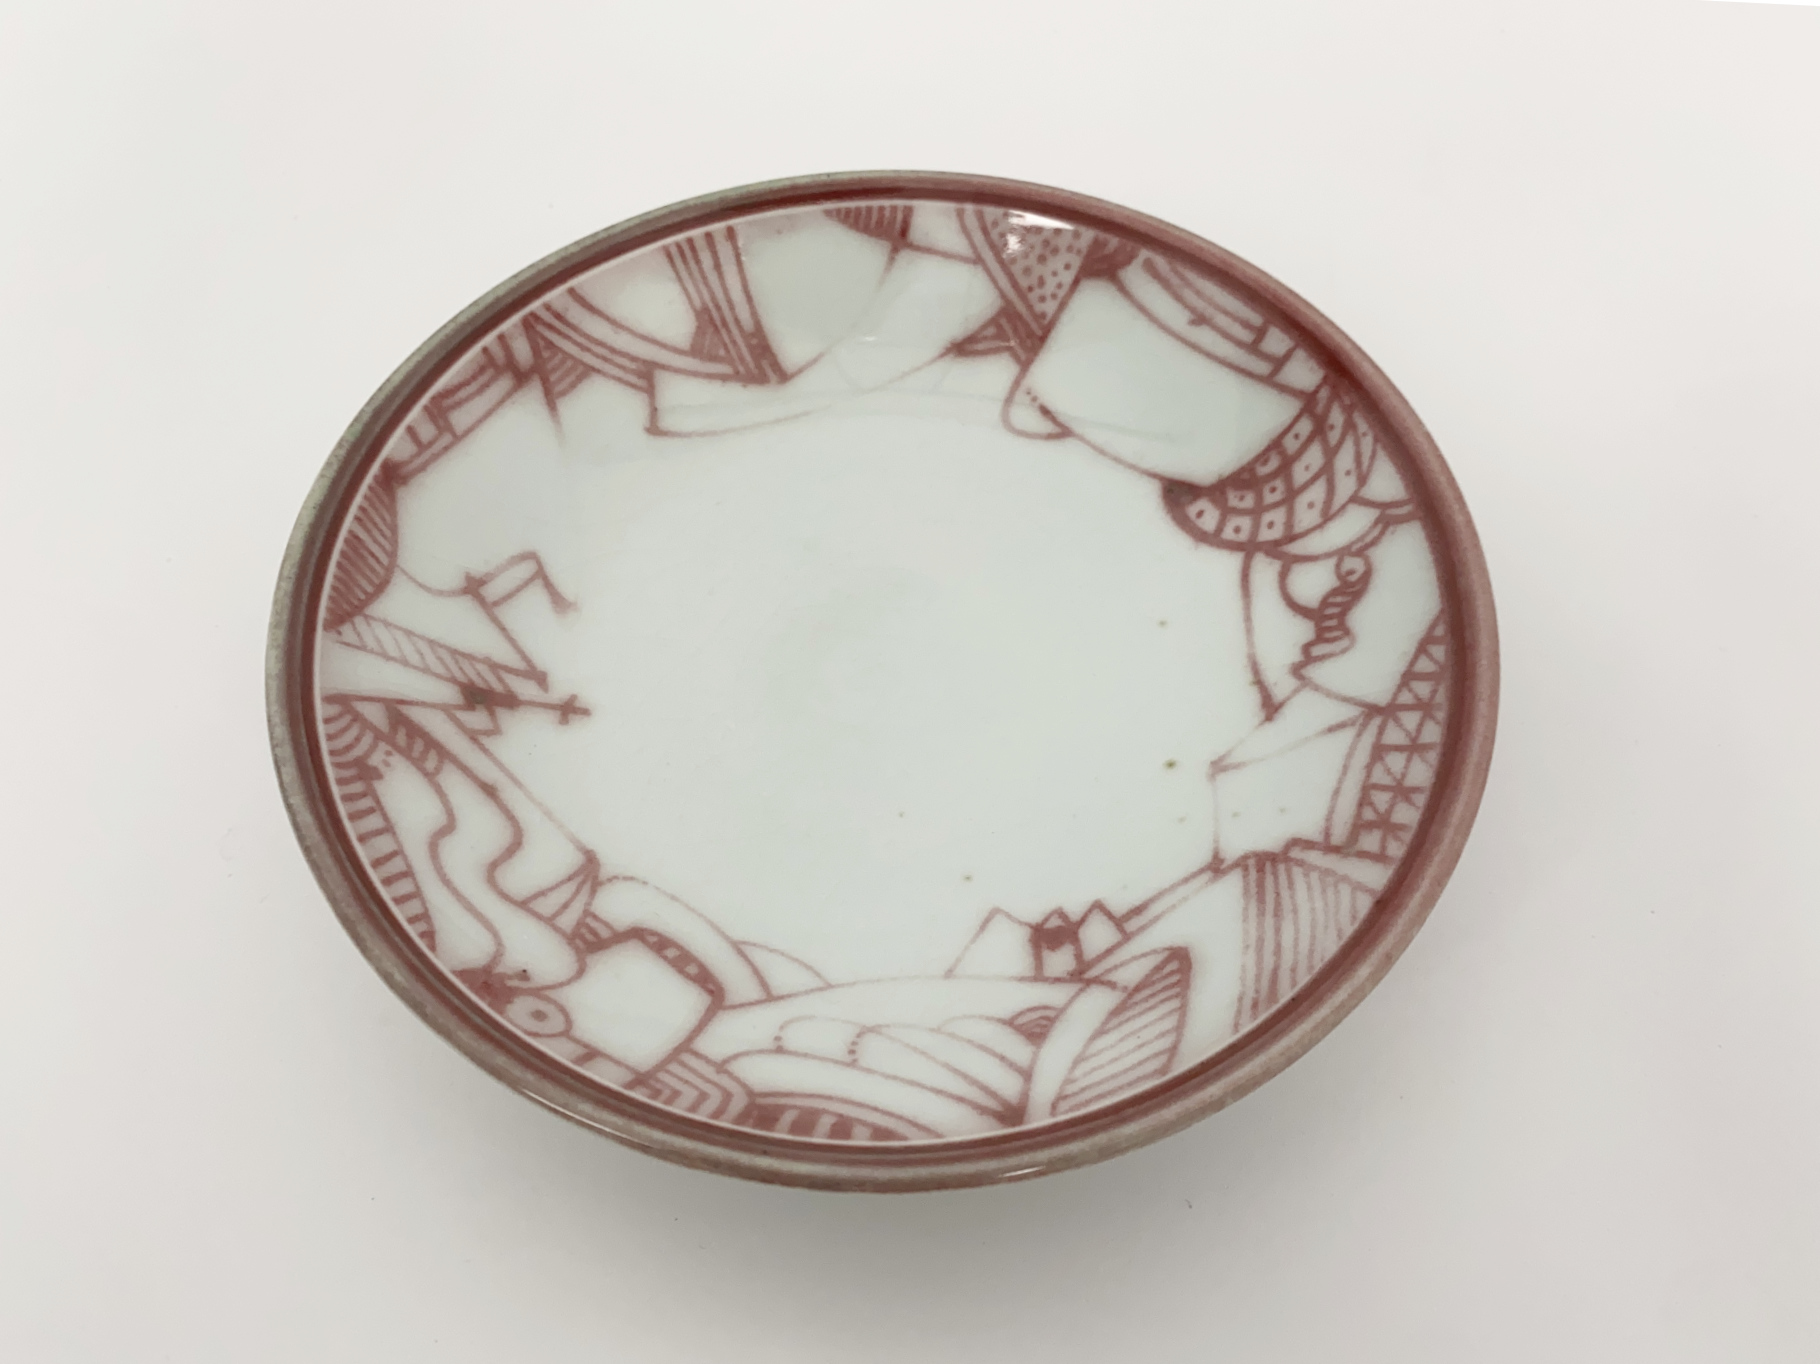 Porcelain Bowl, abstract craquelure Decor, painted with Copper, Lime Glaze, ca 2000